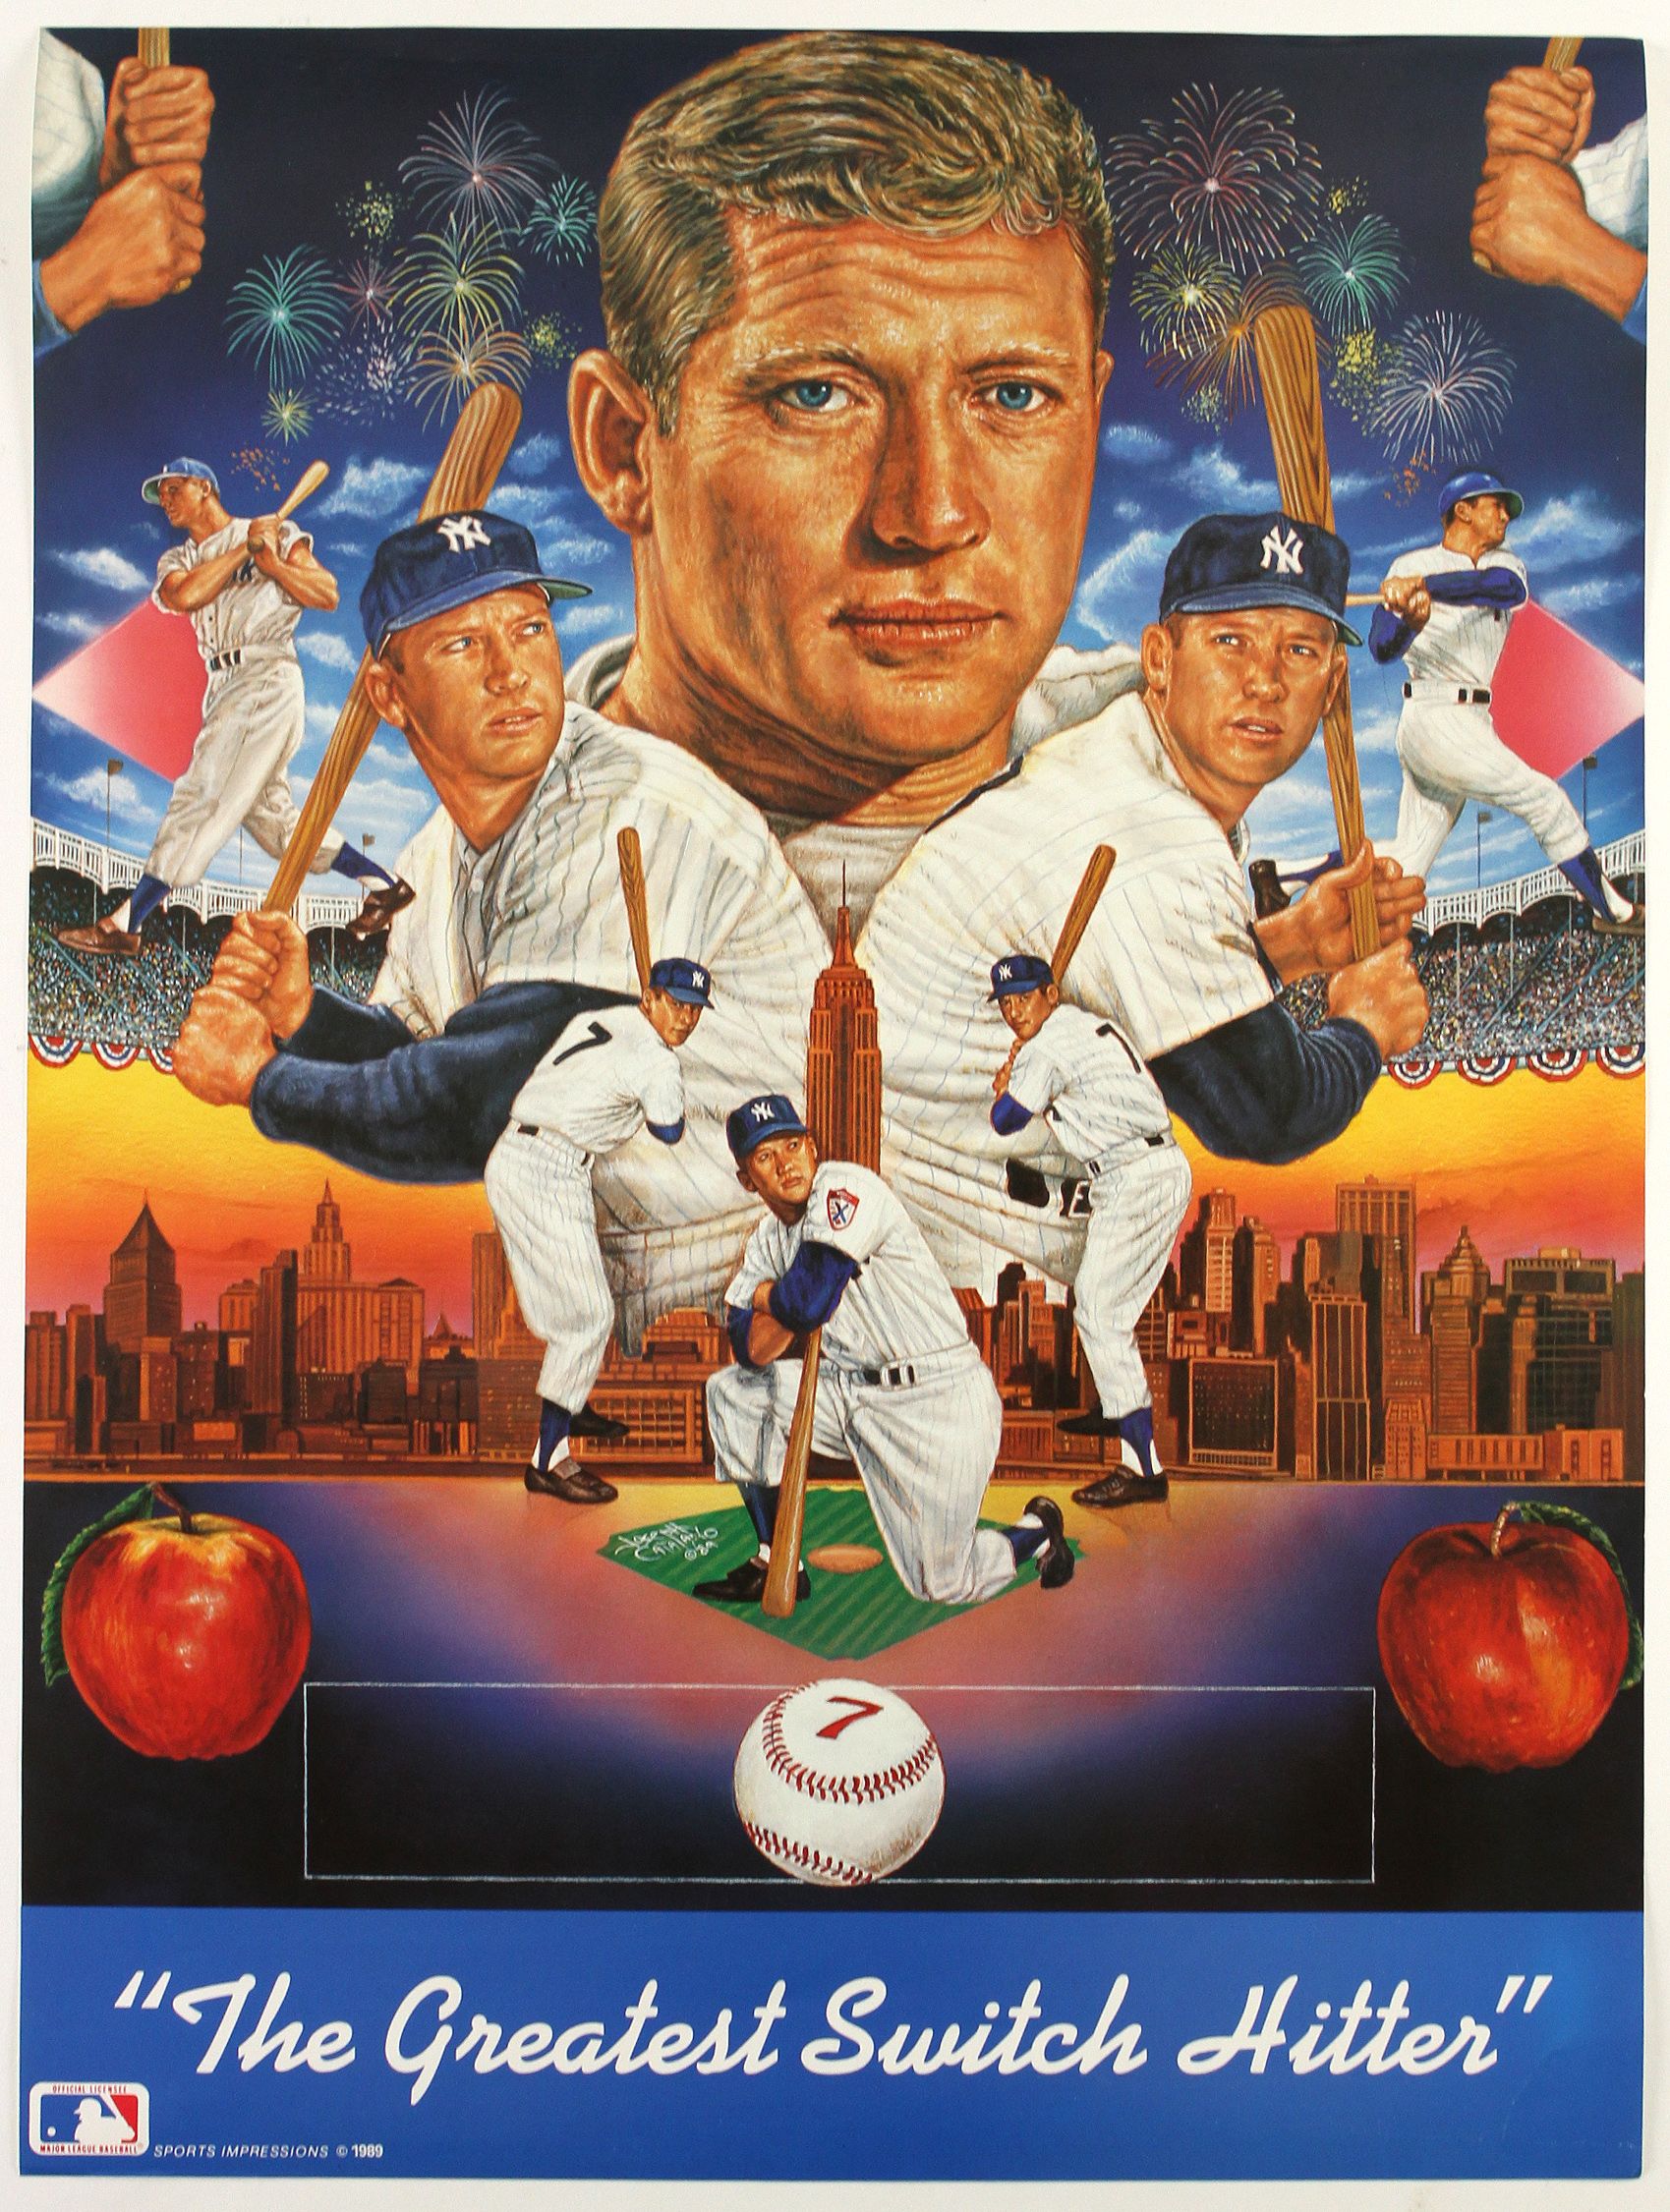 Mickey Mantle 7 and Don Mattingly Yankee Tradition Poster 